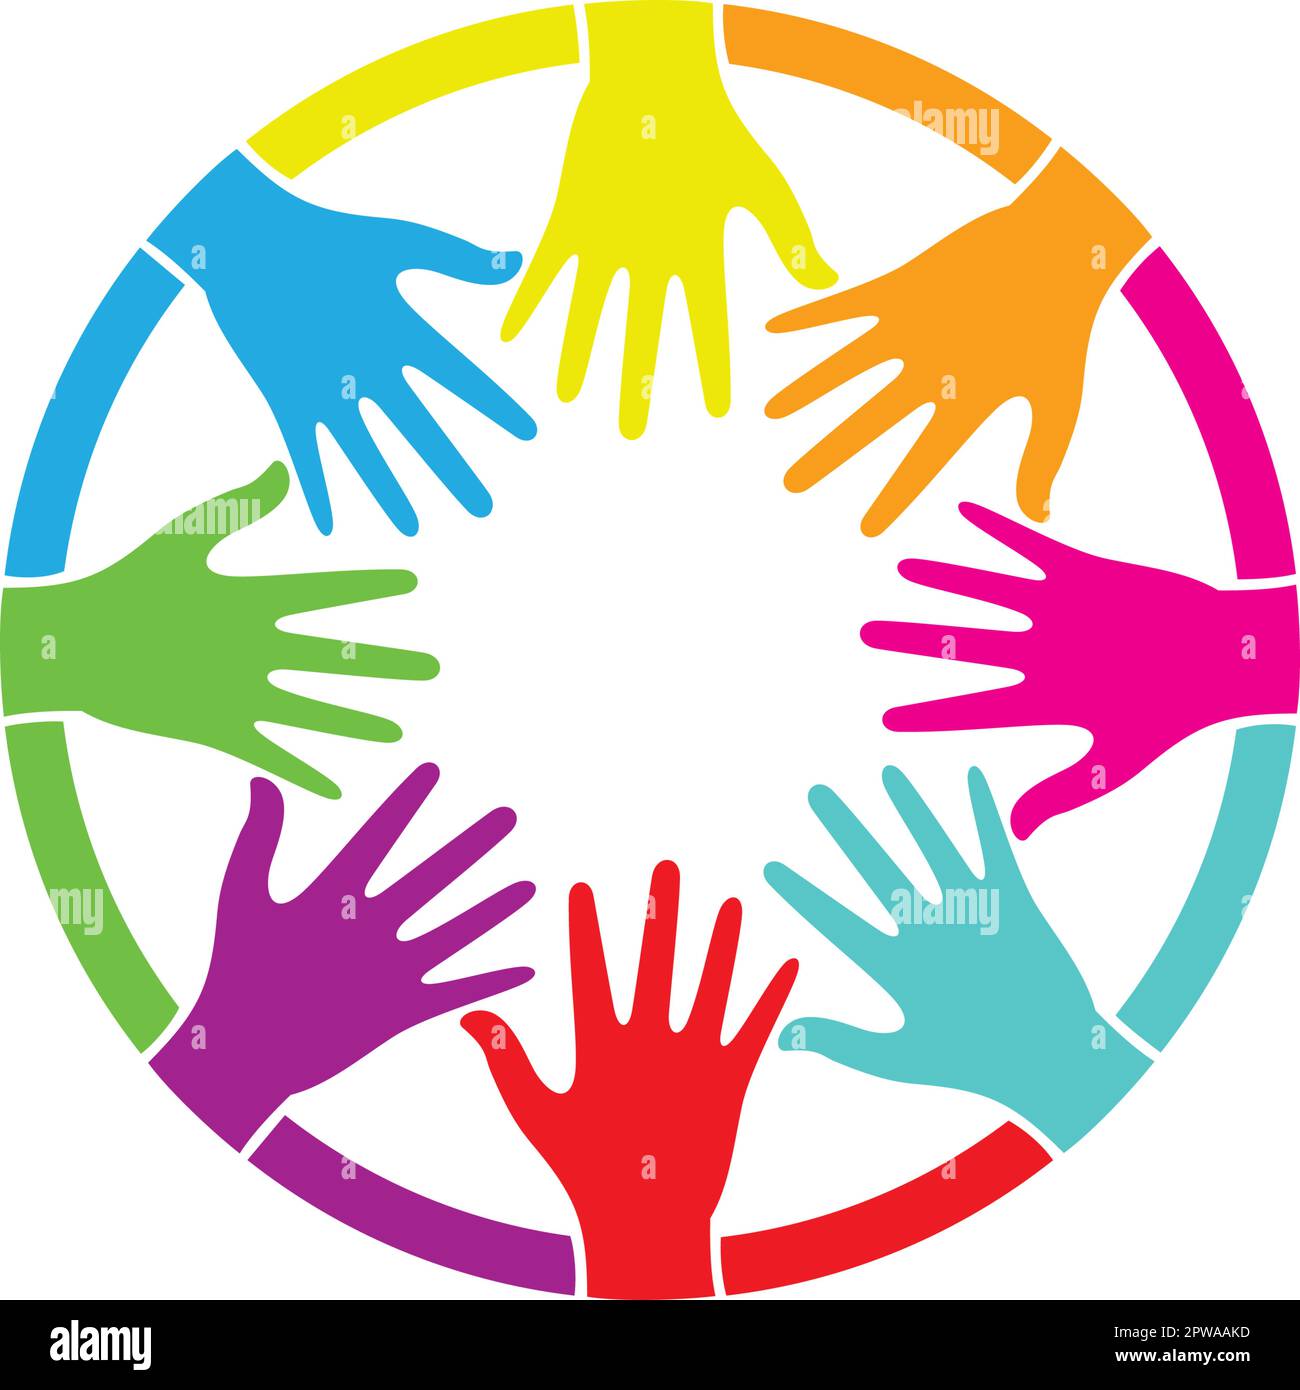 Group of Hands with Colorful Color Forming a Circle Shape Illustration Stock Vector